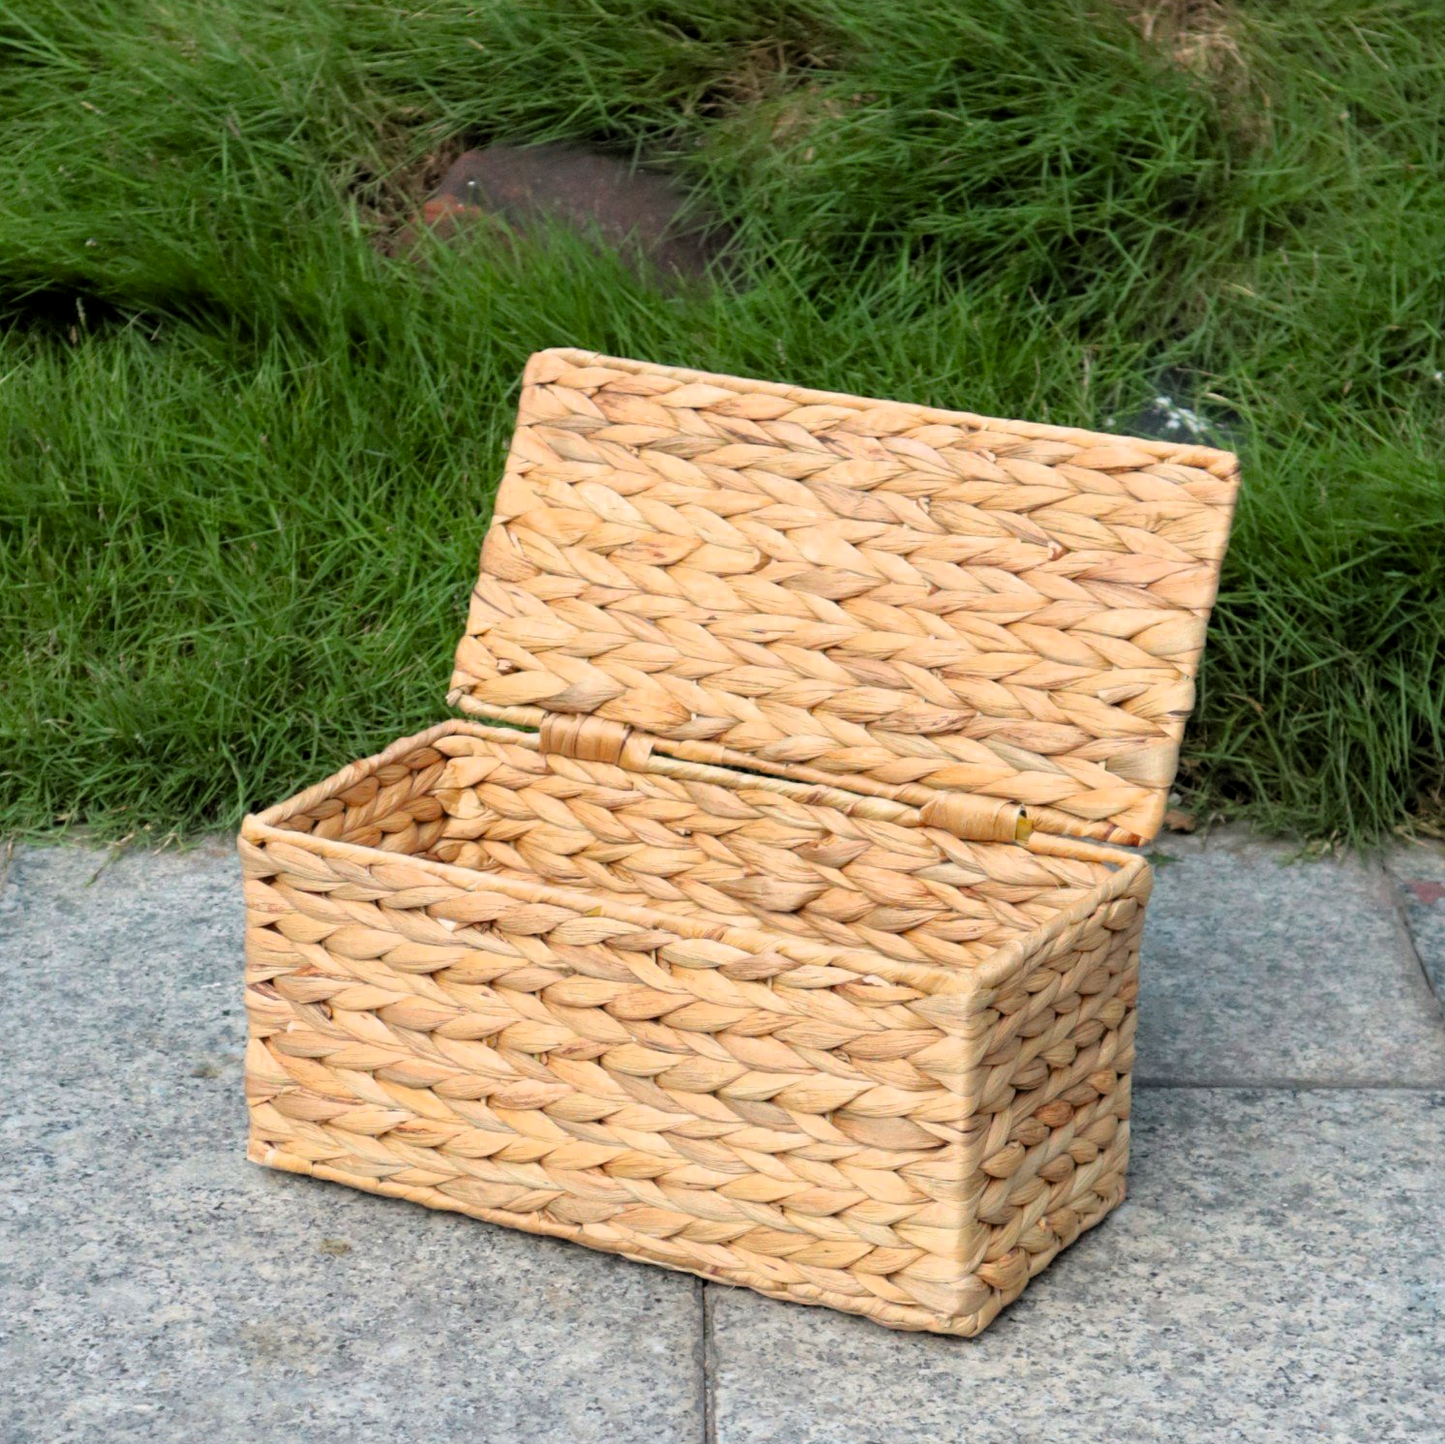 Eden Grace Single Rectangular Basket with Cover - Handwoven Water Hyacinth for Stylish Organization